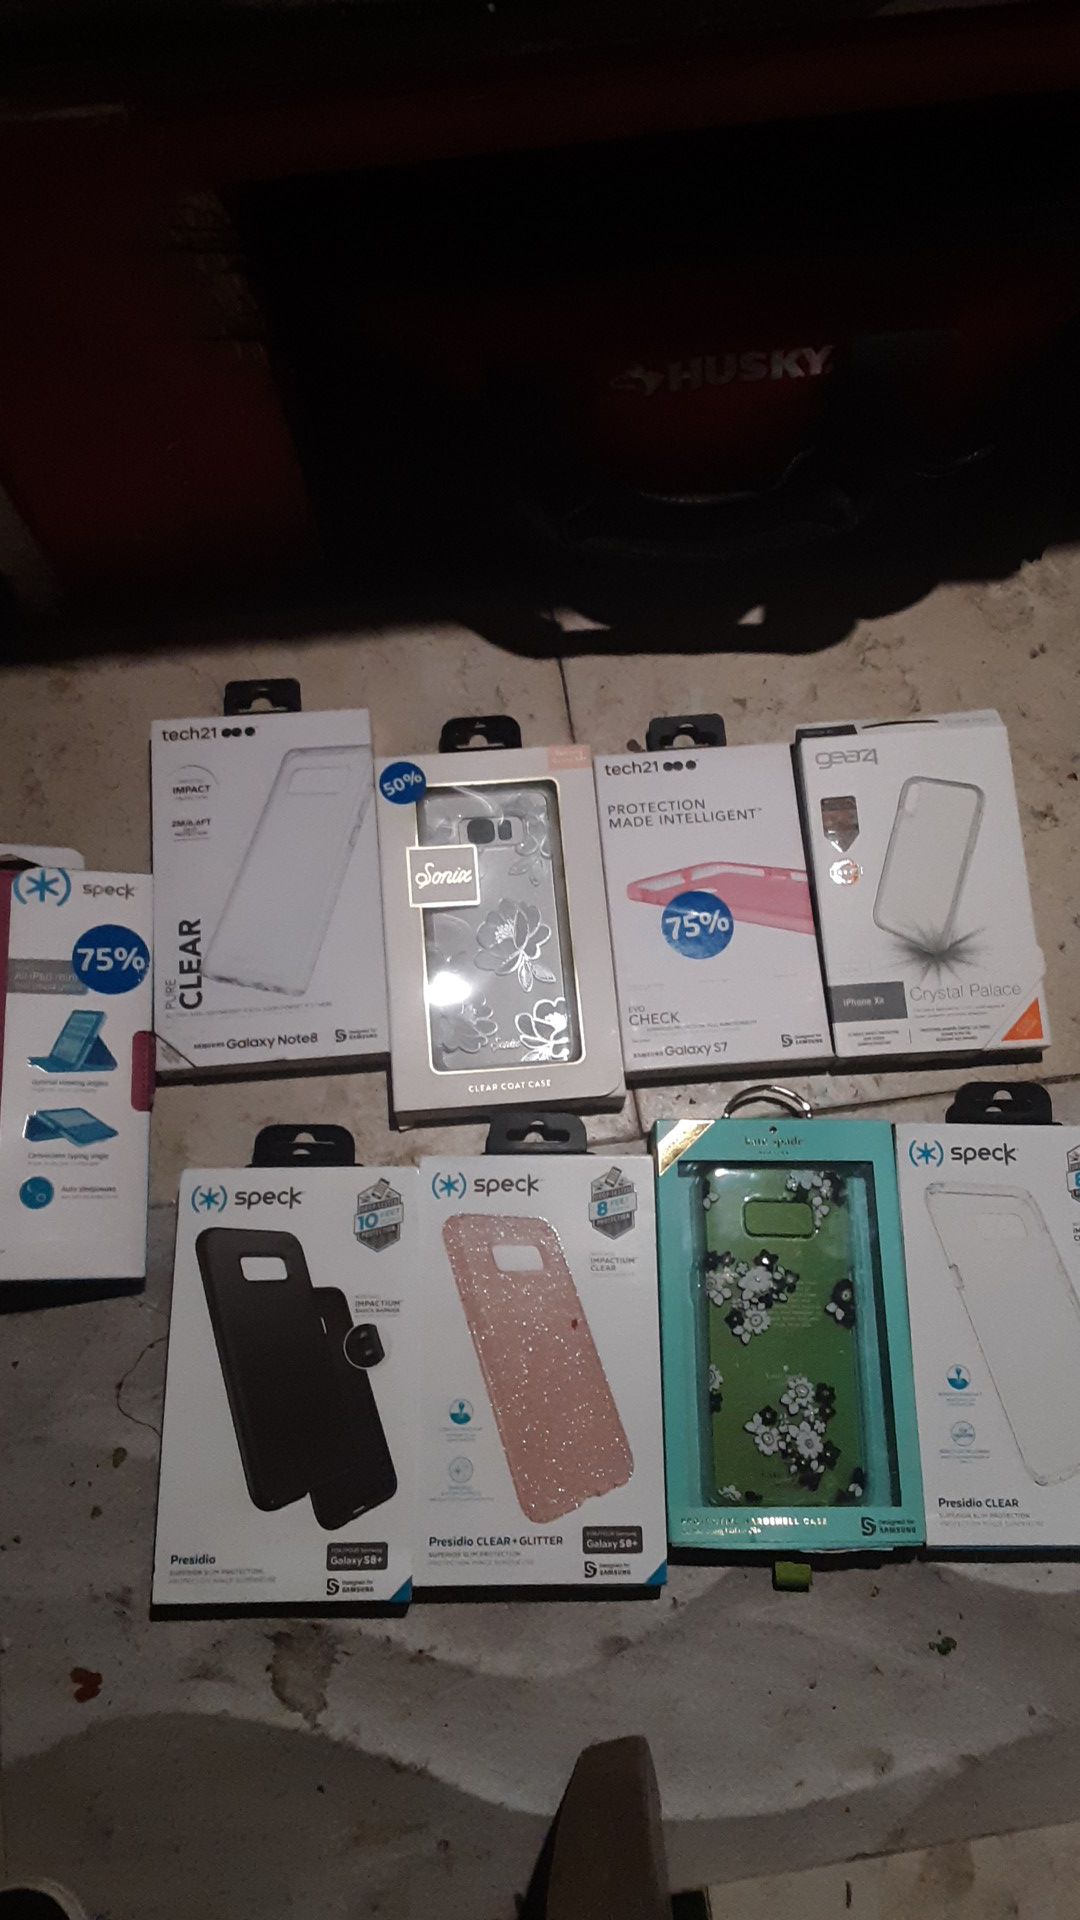 Kate Spade Galaxy s8+,s7,iphoneXr,Note8,iPhone x lifeproof waterproof,dirt proof,snowproof,dropproof new in box